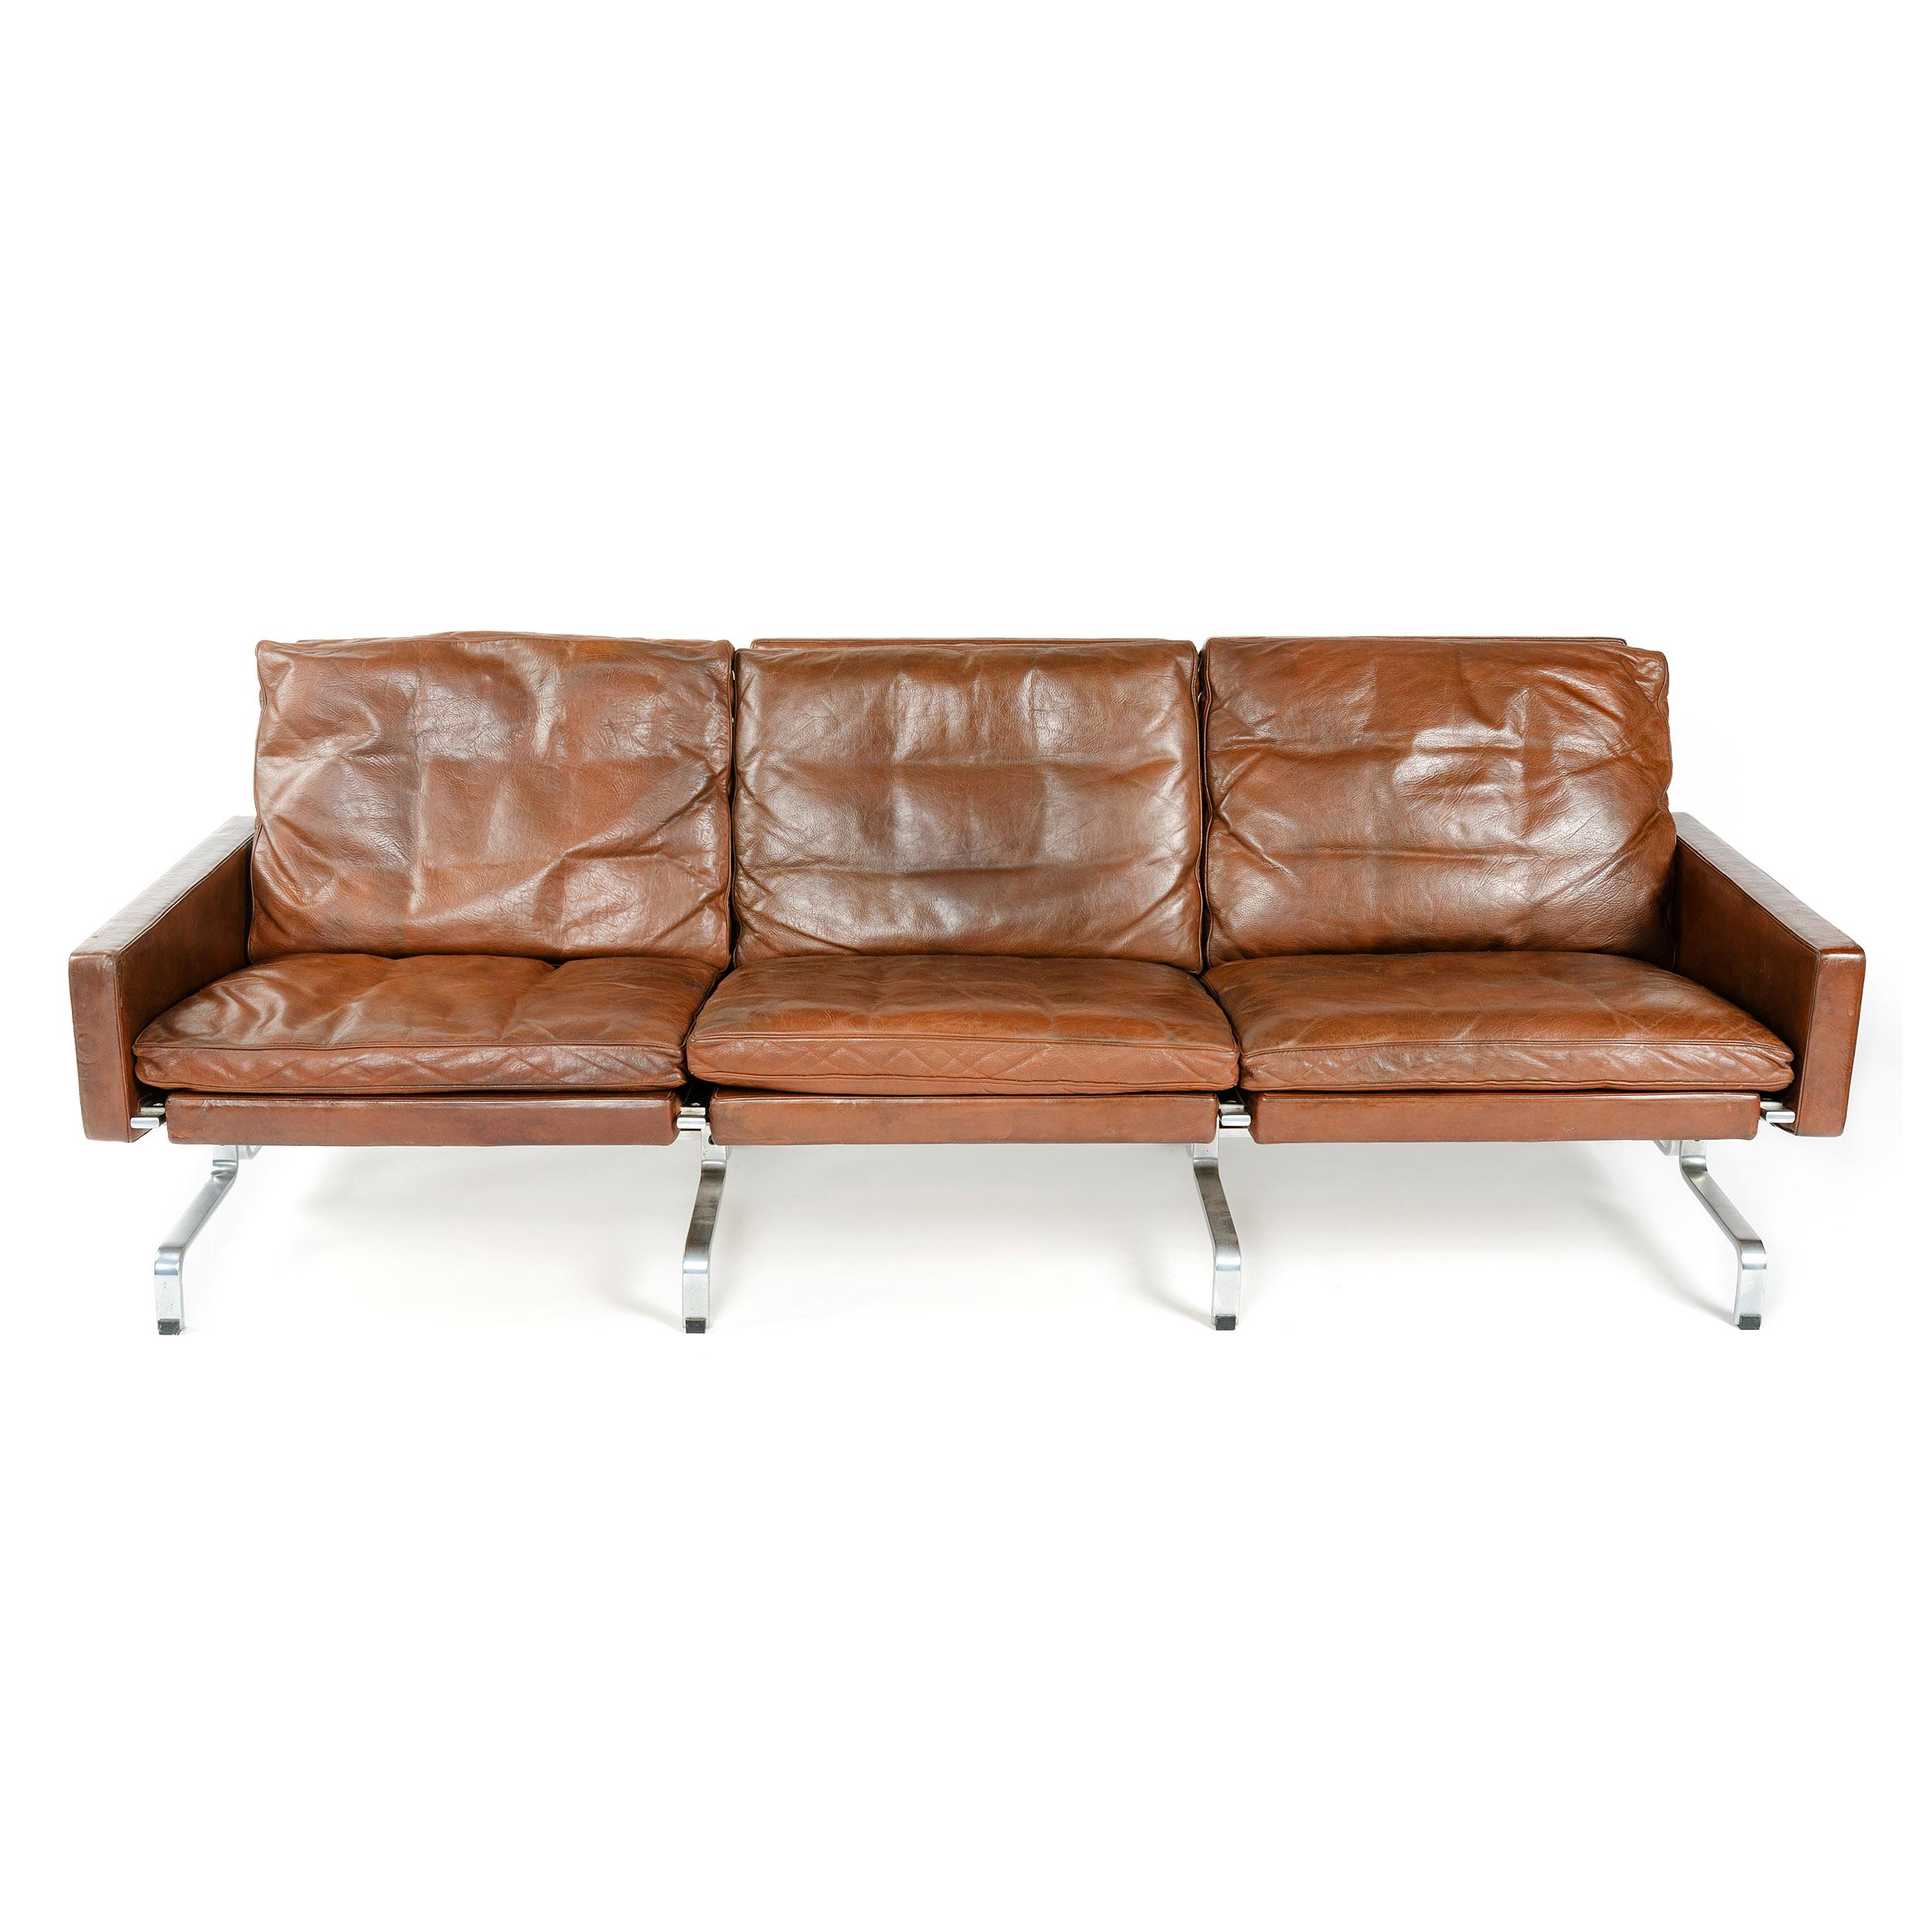 A 'PK31-3' three-seat sofa with a stainless steel frame; retaining the original brown leather upholstery.